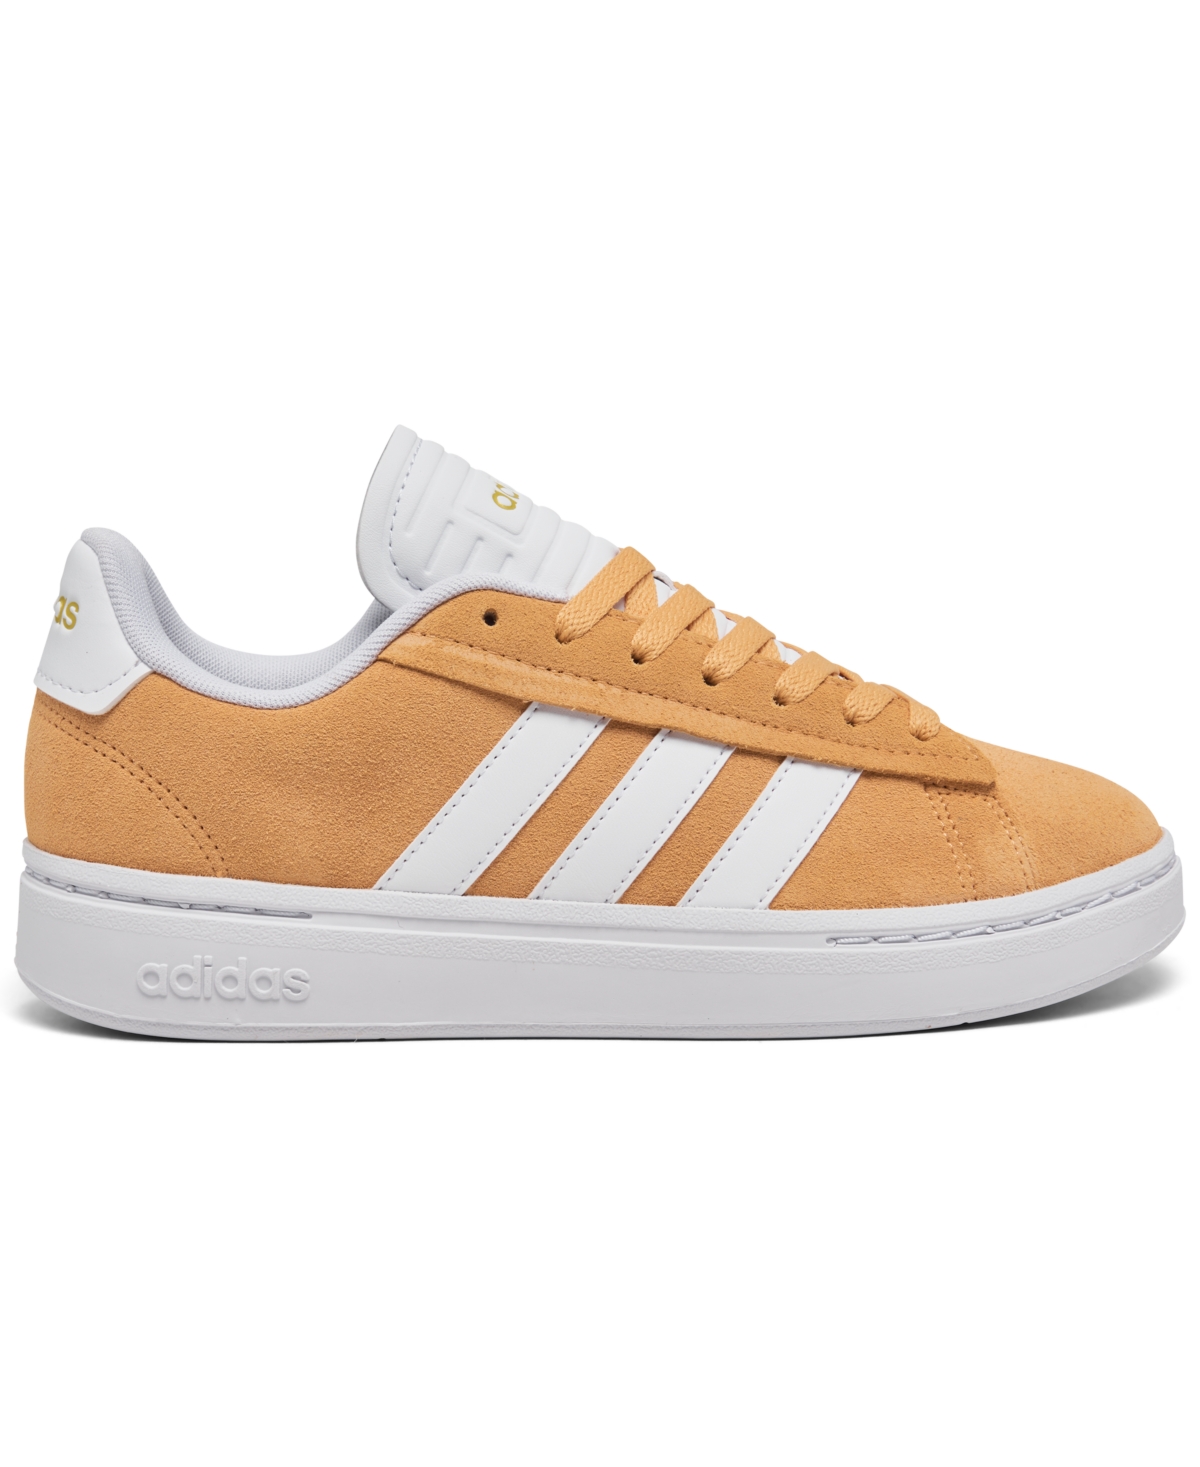 Shop Adidas Originals Women's Grand Court Alpha Cloudfoam Lifestyle Comfort Casual Sneakers From Finish Line In Hazy Orange,white,gold